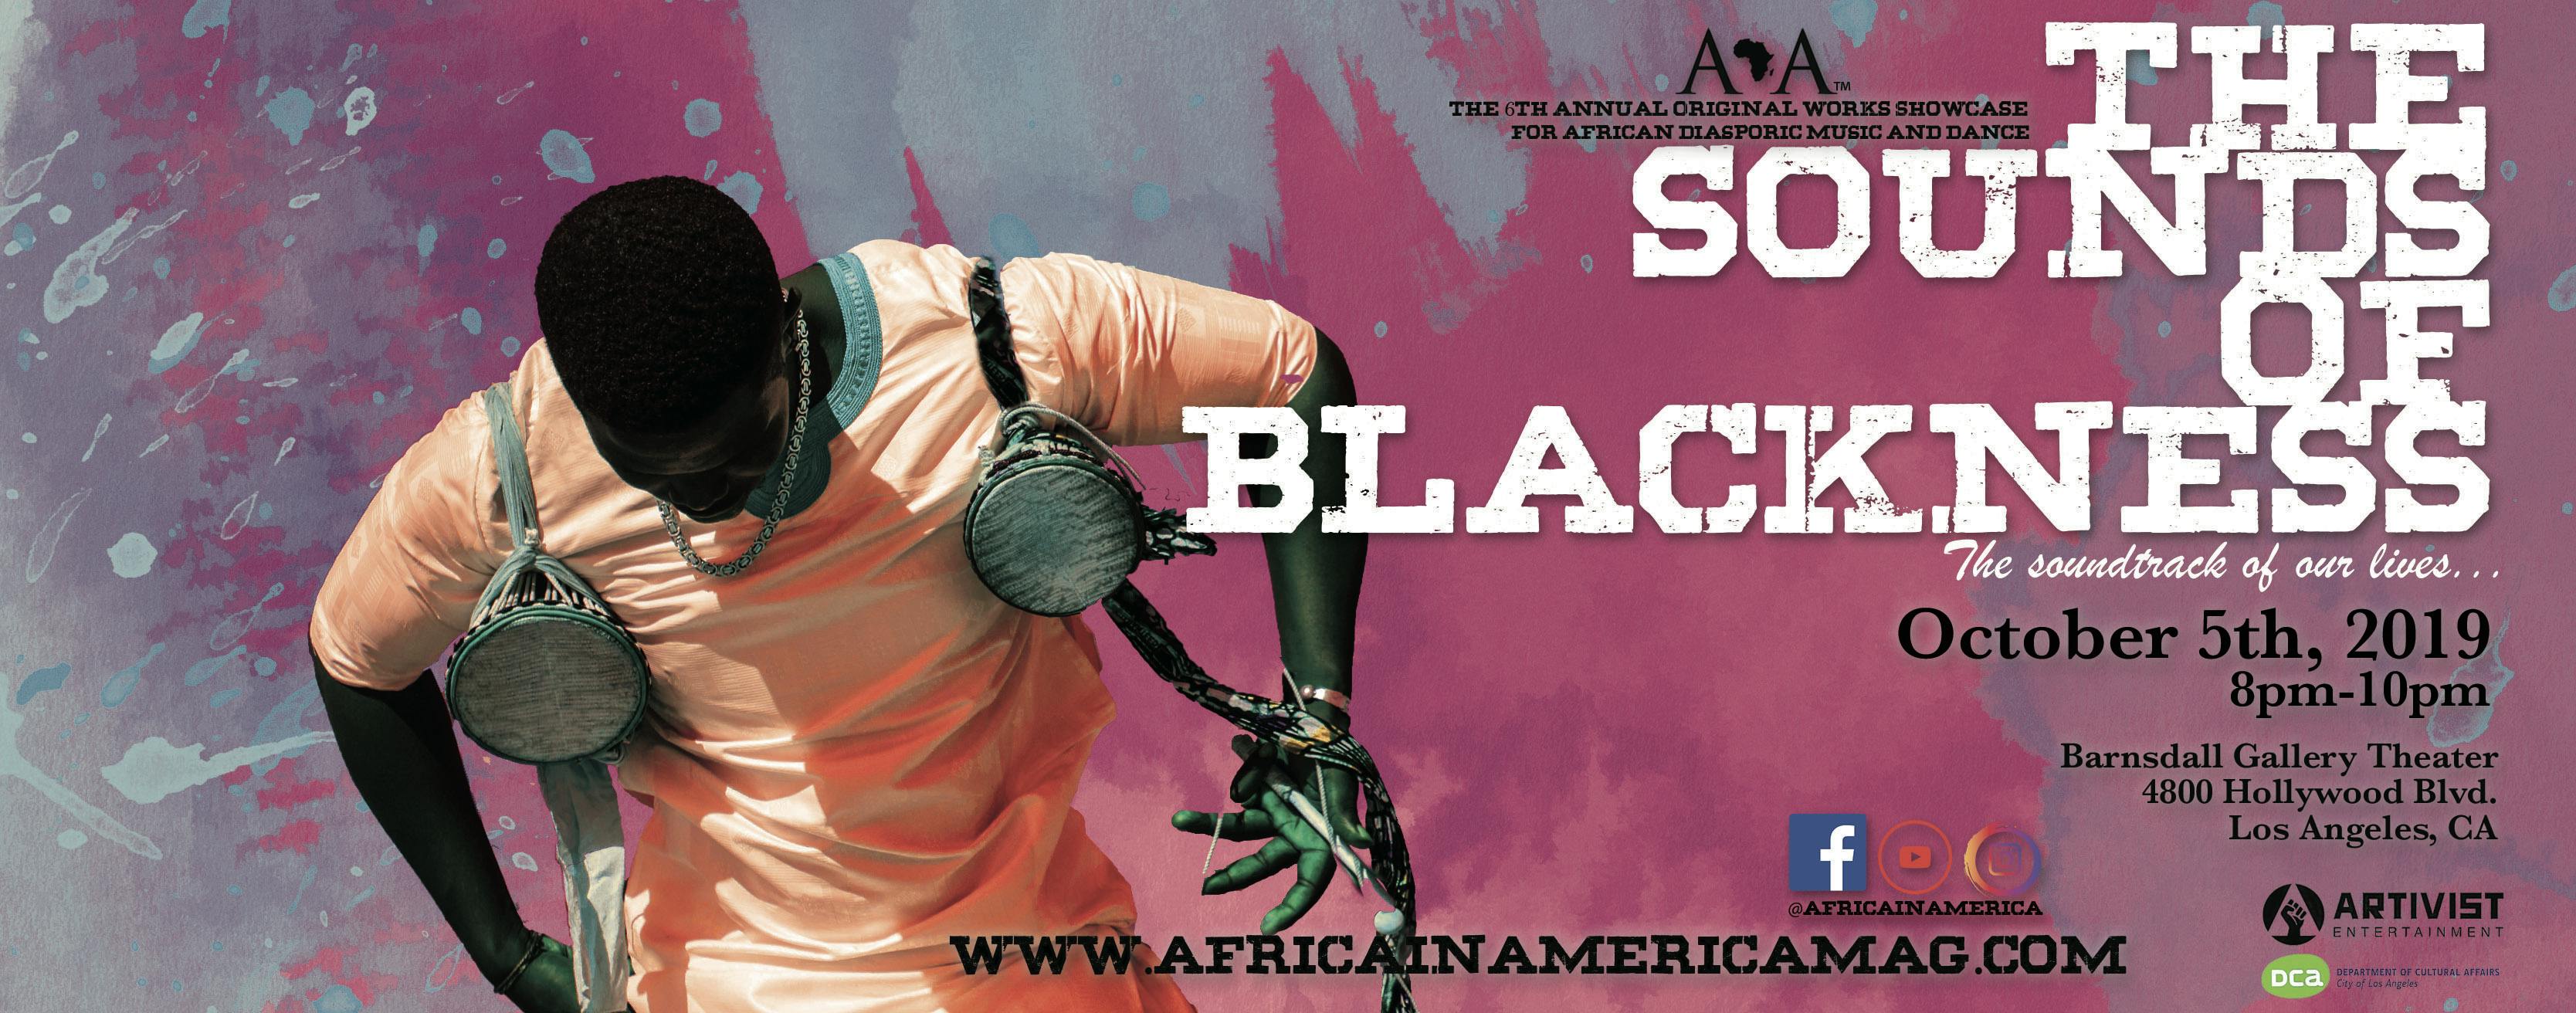 Africa in America Presents...THE SOUNDS OF BLACKNESS Original Works Showcase